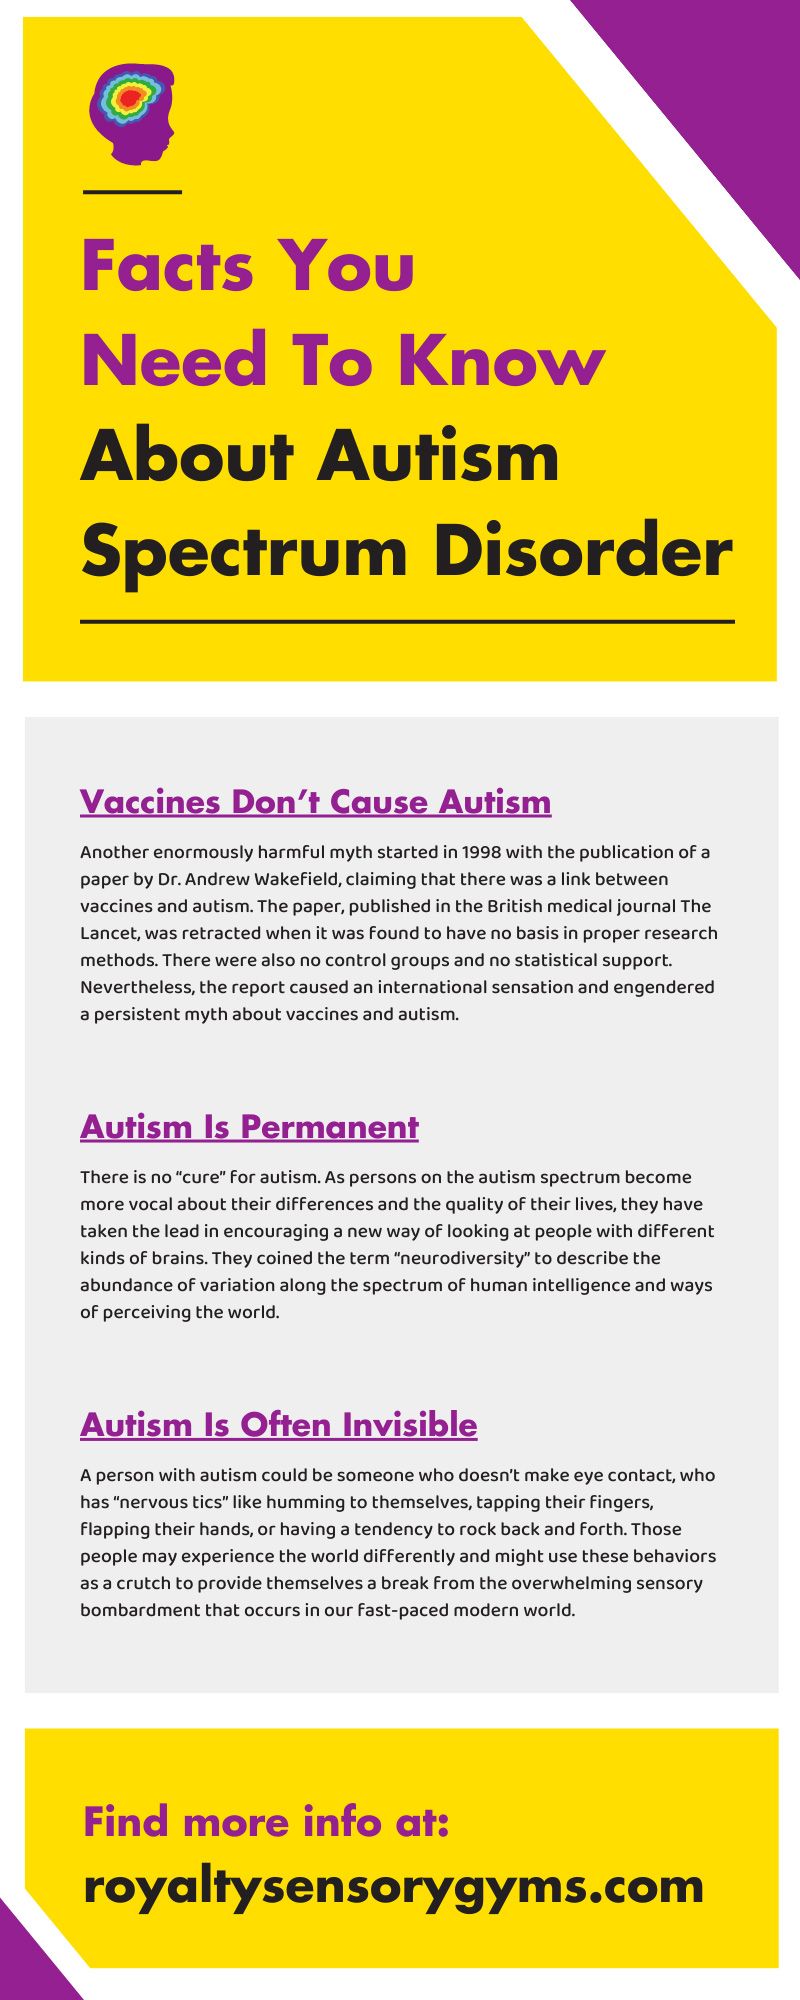 10 Facts You Need To Know About Autism Spectrum Disorder